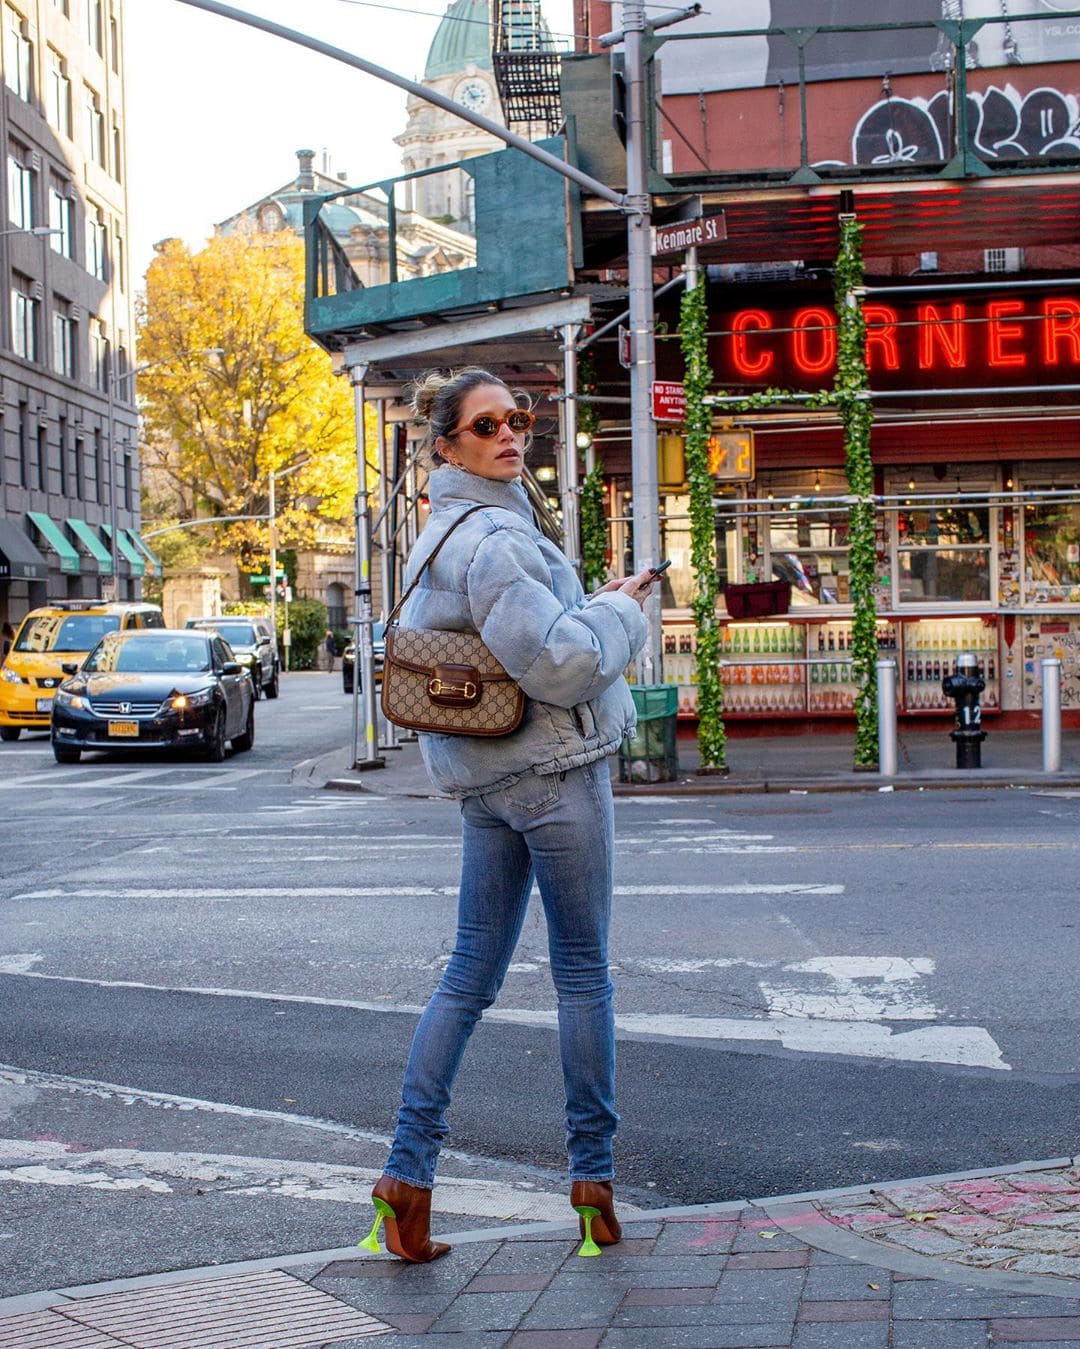 The Many Celebrities and Influencers with Their Gucci 1955 Horsebit Bags -  PurseBlog